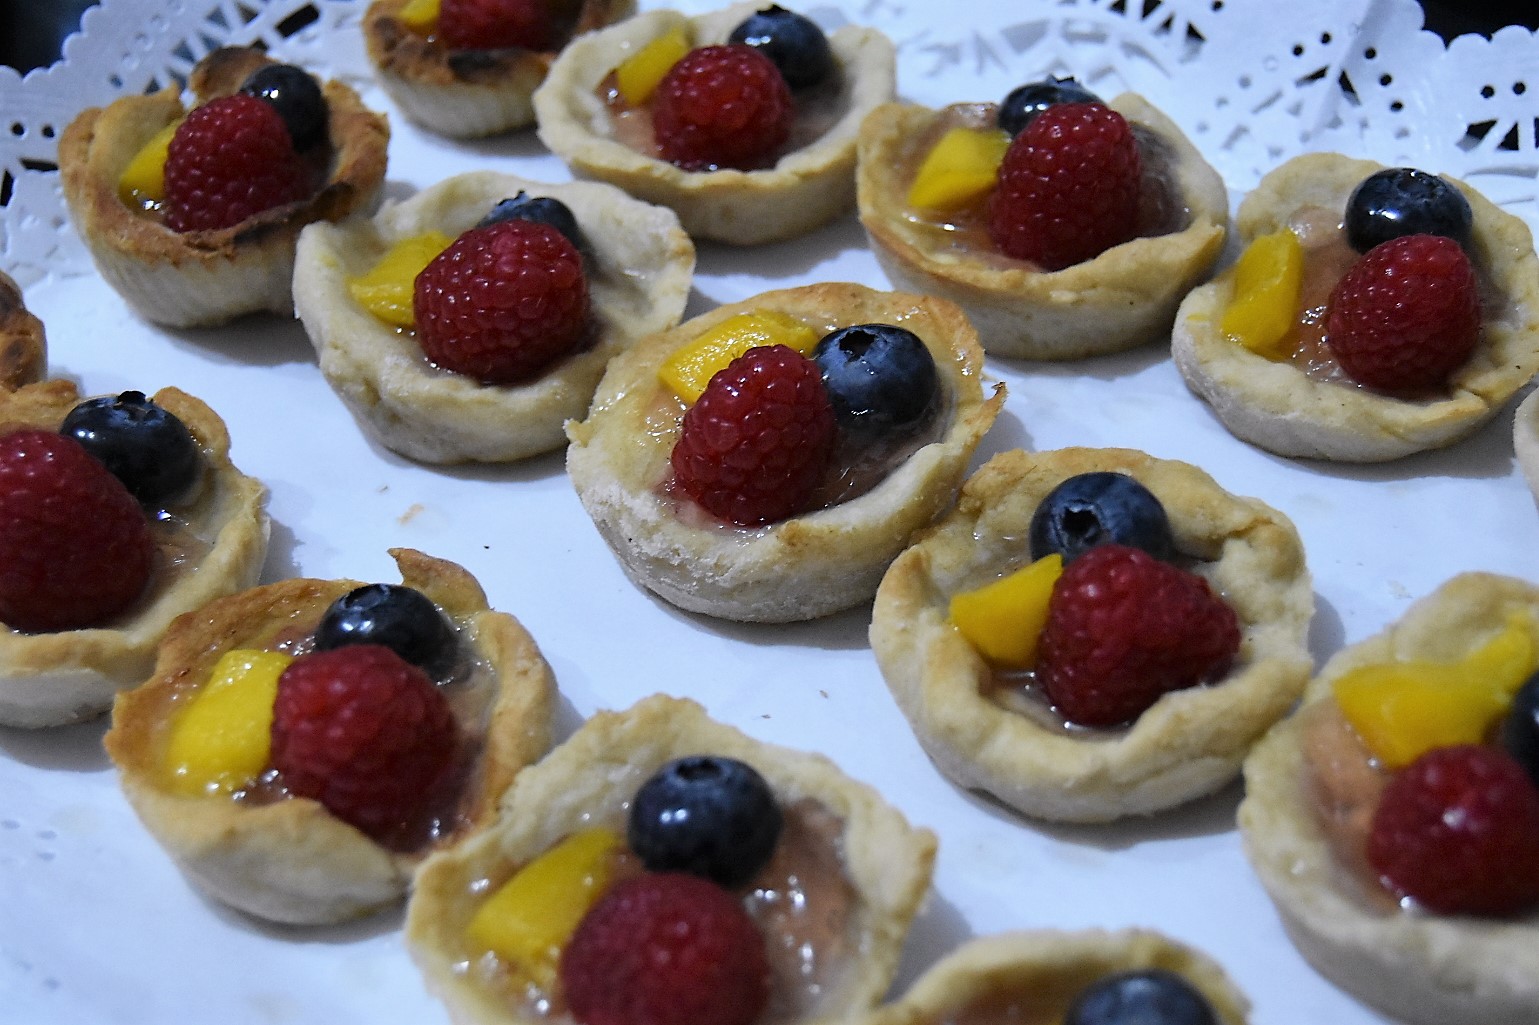 A white plate with three rows of small homemade tarts, each topped with a rasberry, a bluebery and a small piece of mango.